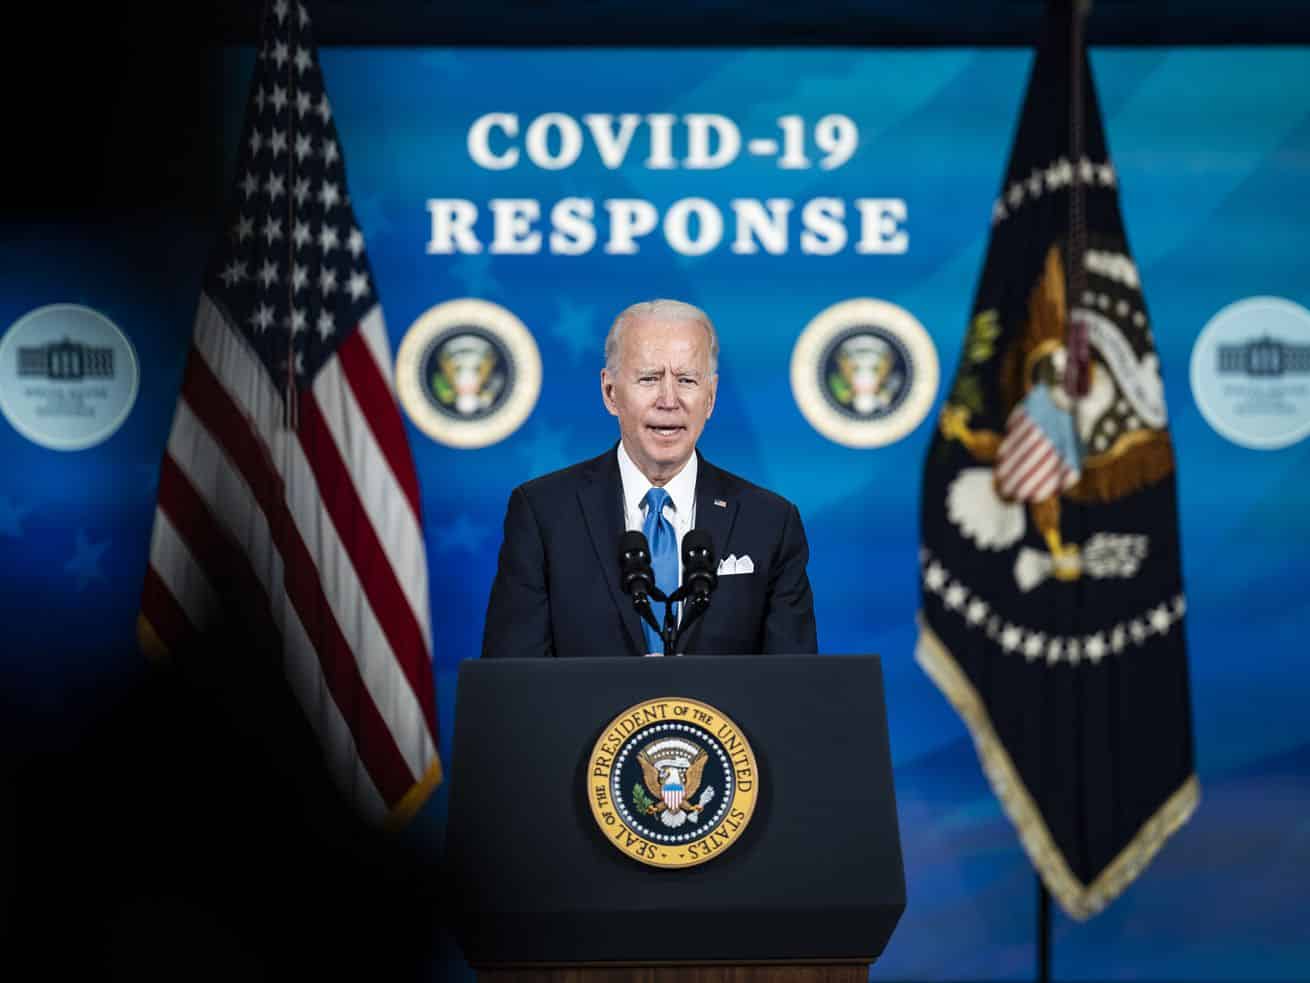 The controversy over Biden not holding a formal press conference, explained